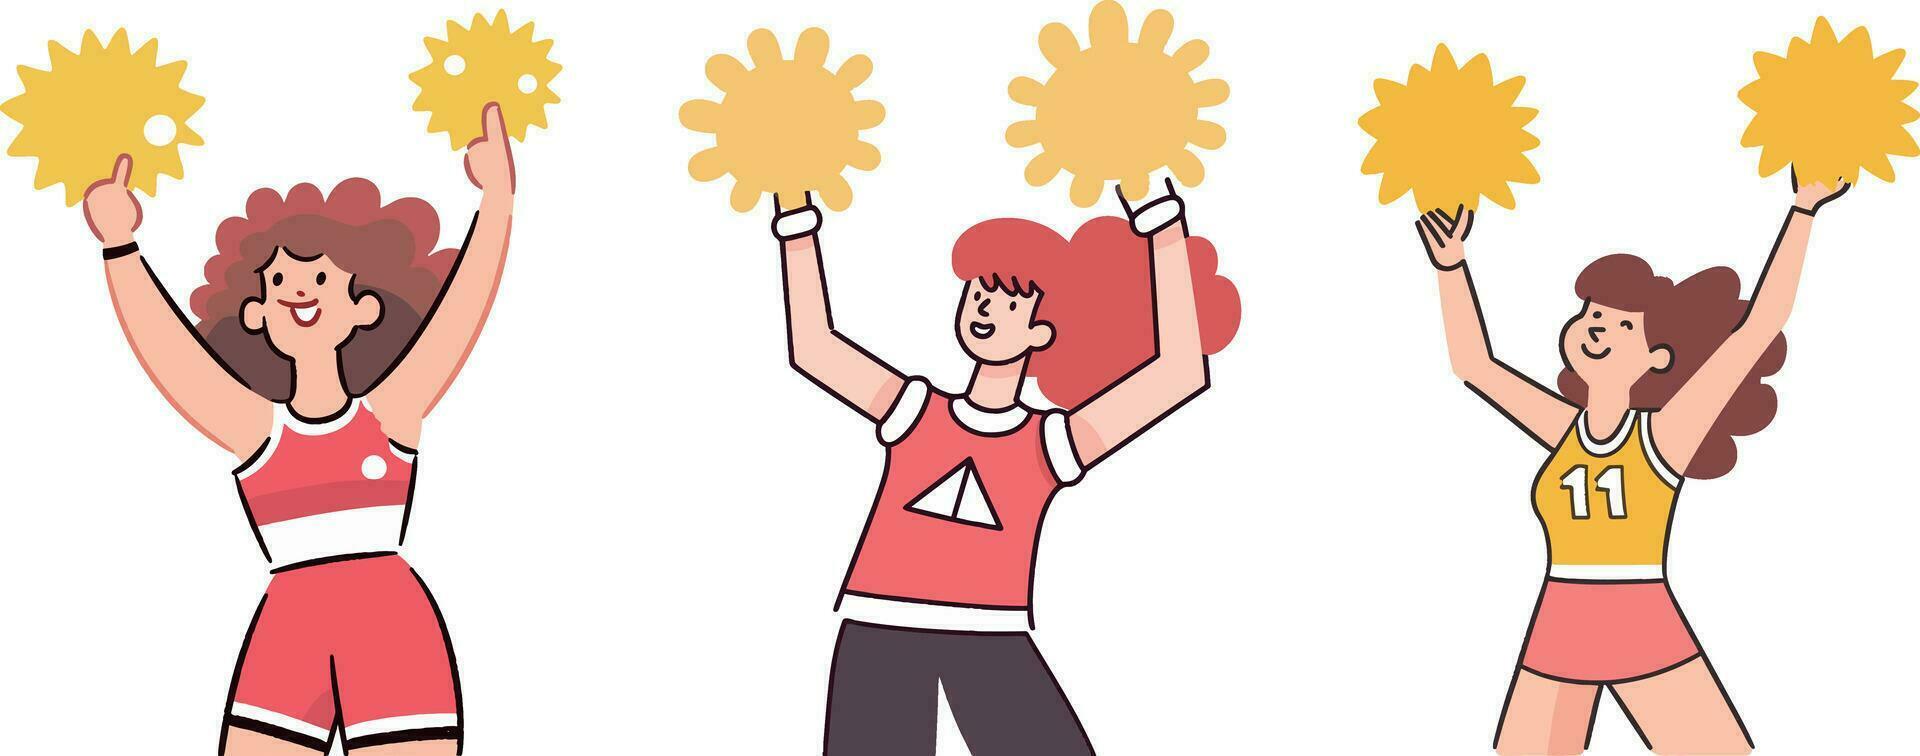 Vector cheerleader is cheerleading with pom poms in her hands supporter cheering for a sport team